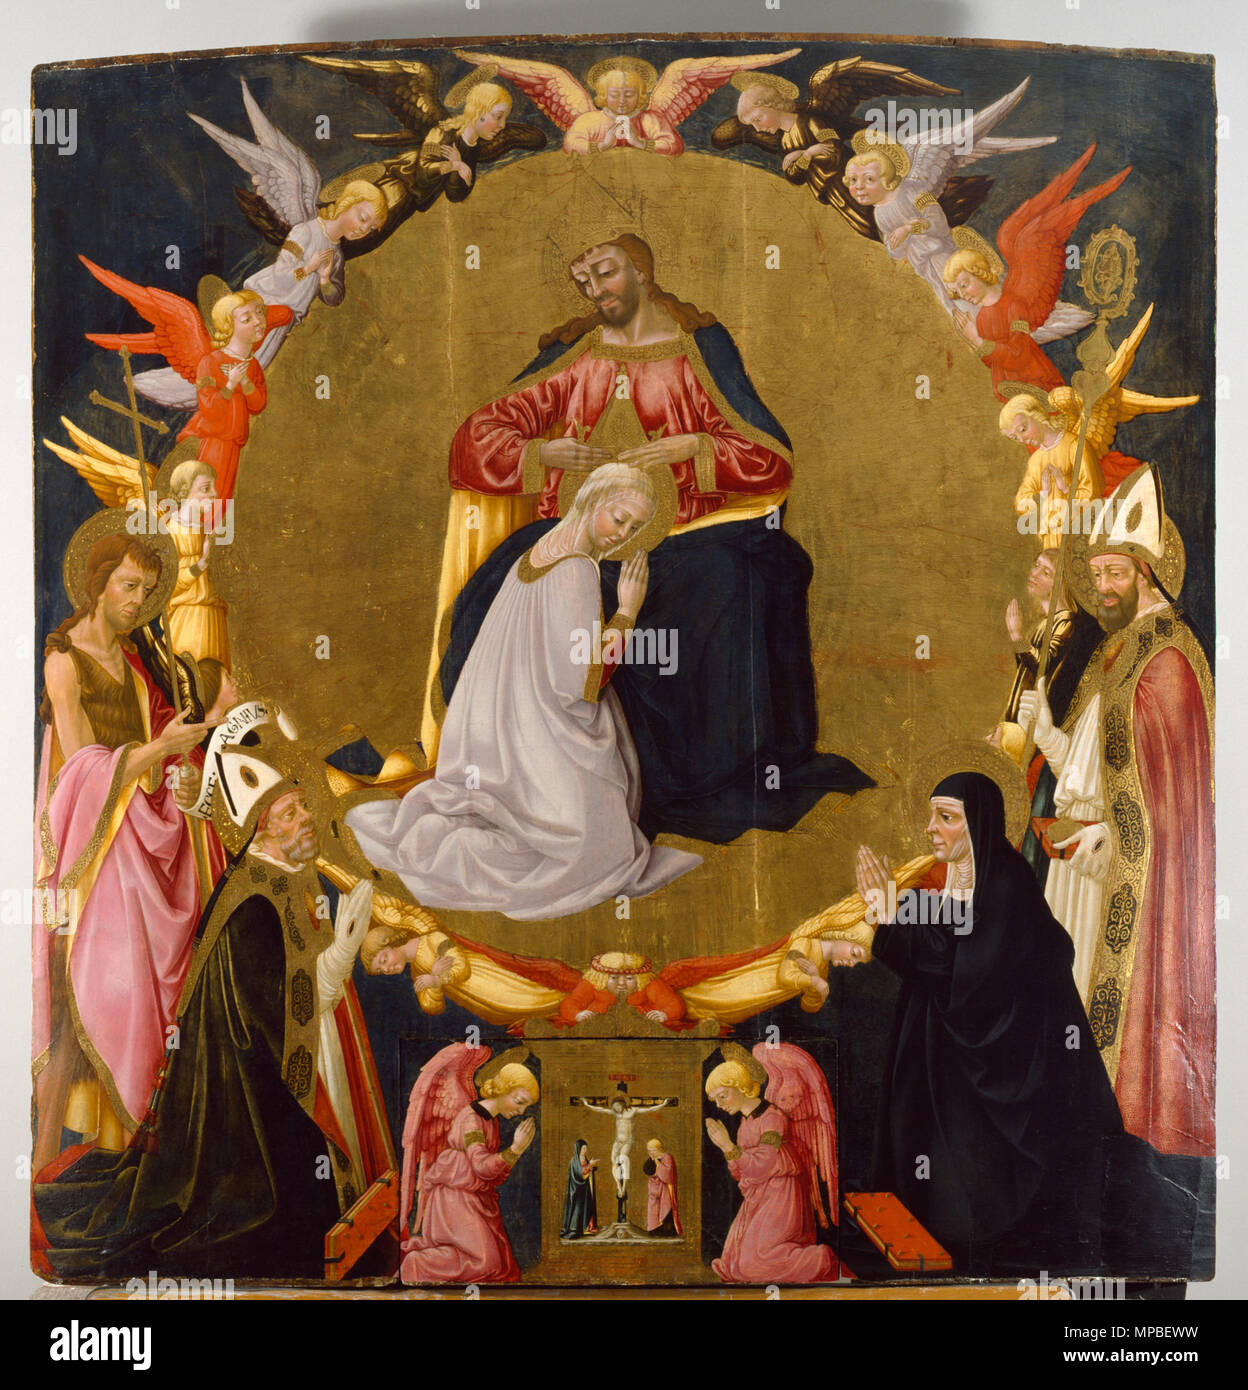 Neri di Bicci (Italian, 1419-1491). 'The Coronation of the Virgin with Angels and Four Saints,' ca. 1470-1475. tempera and gold leaf on panel. Walters Art Museum (37.675): Acquired by Henry Walters with the Massarenti Collection, 1902. 37.675 922 Neri di Bicci - The Coronation of the Virgin with Angels and Four Saints - Walters 37675 Stock Photo